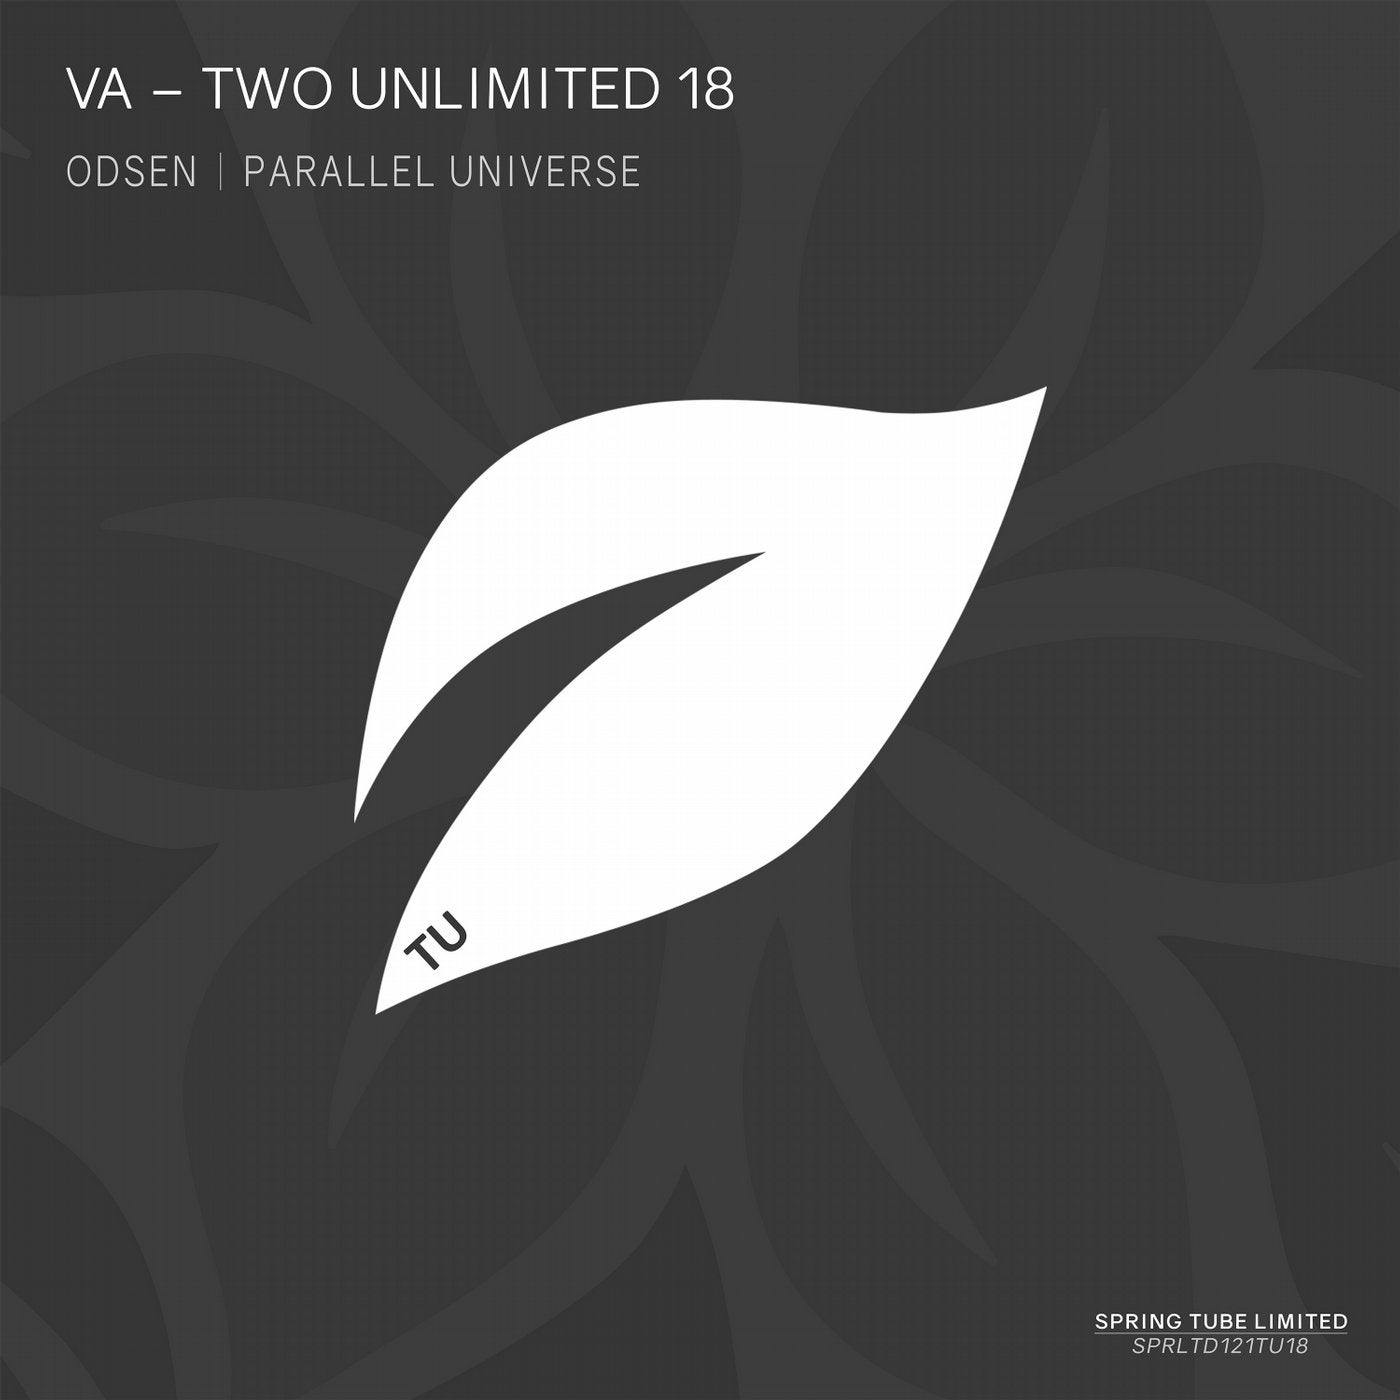 Two Unlimited 18